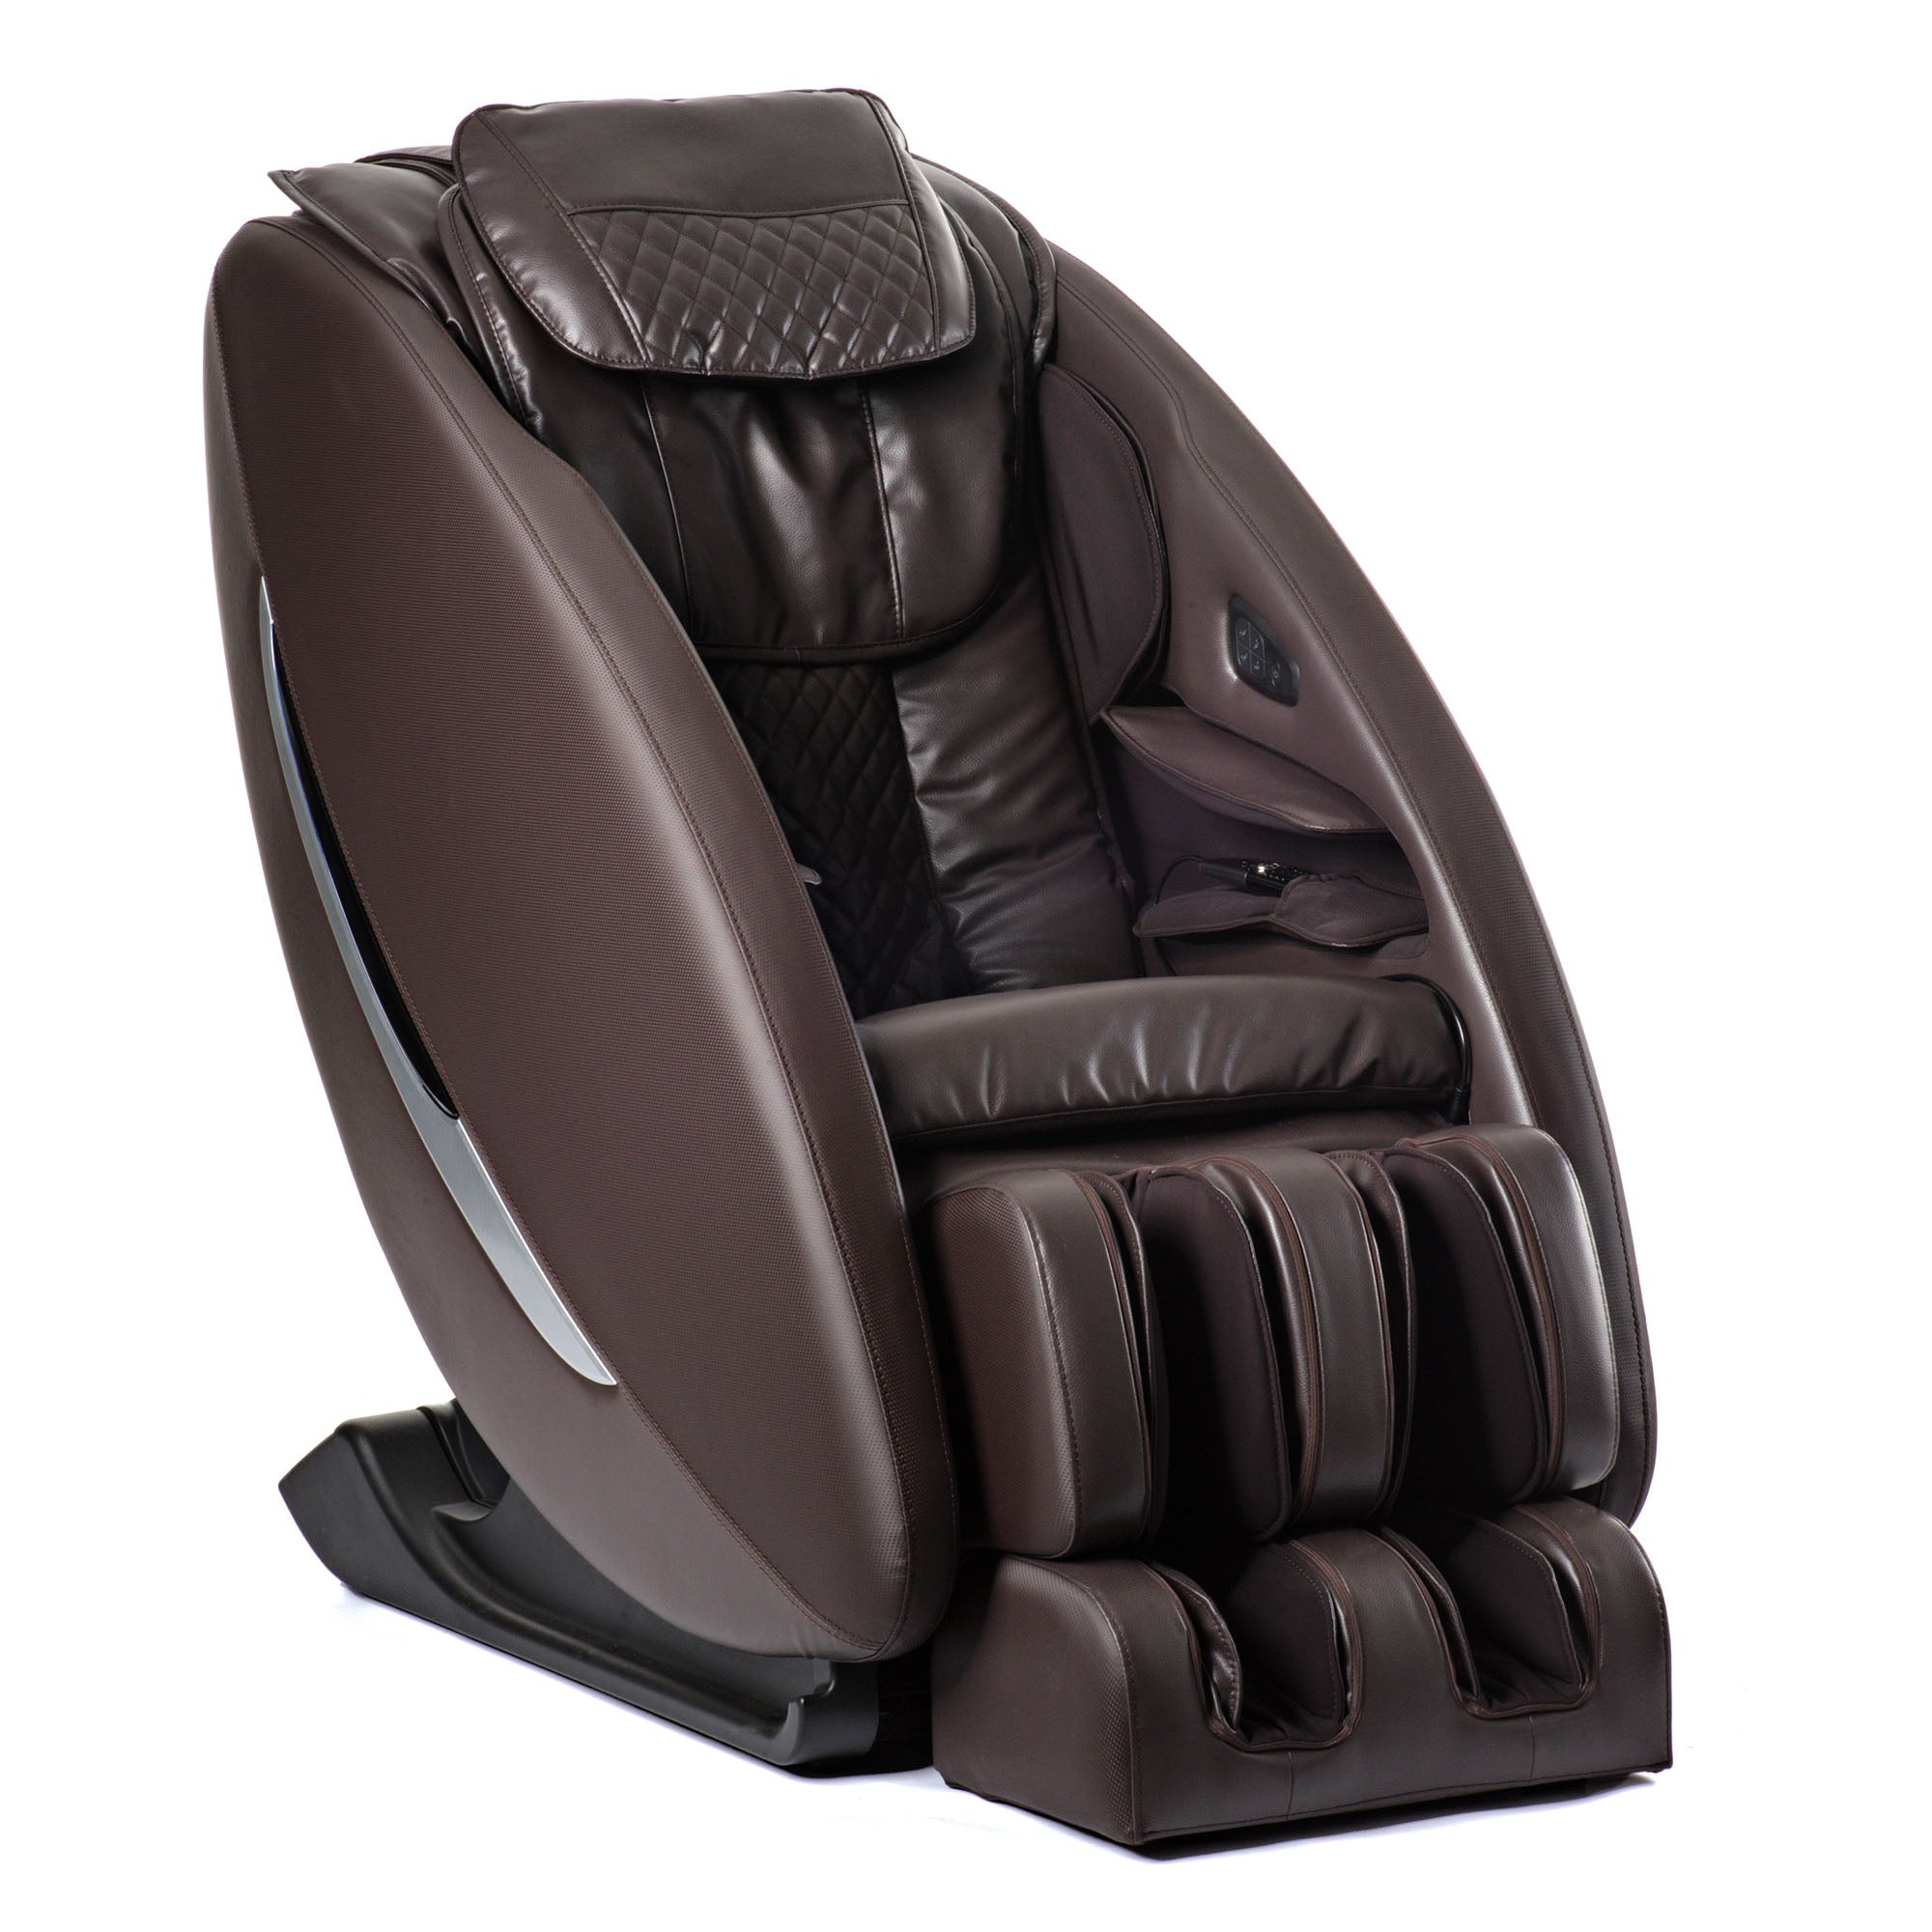 Osaki Massage Chair Cleaner & Chair Cover Bundle | Brookstone